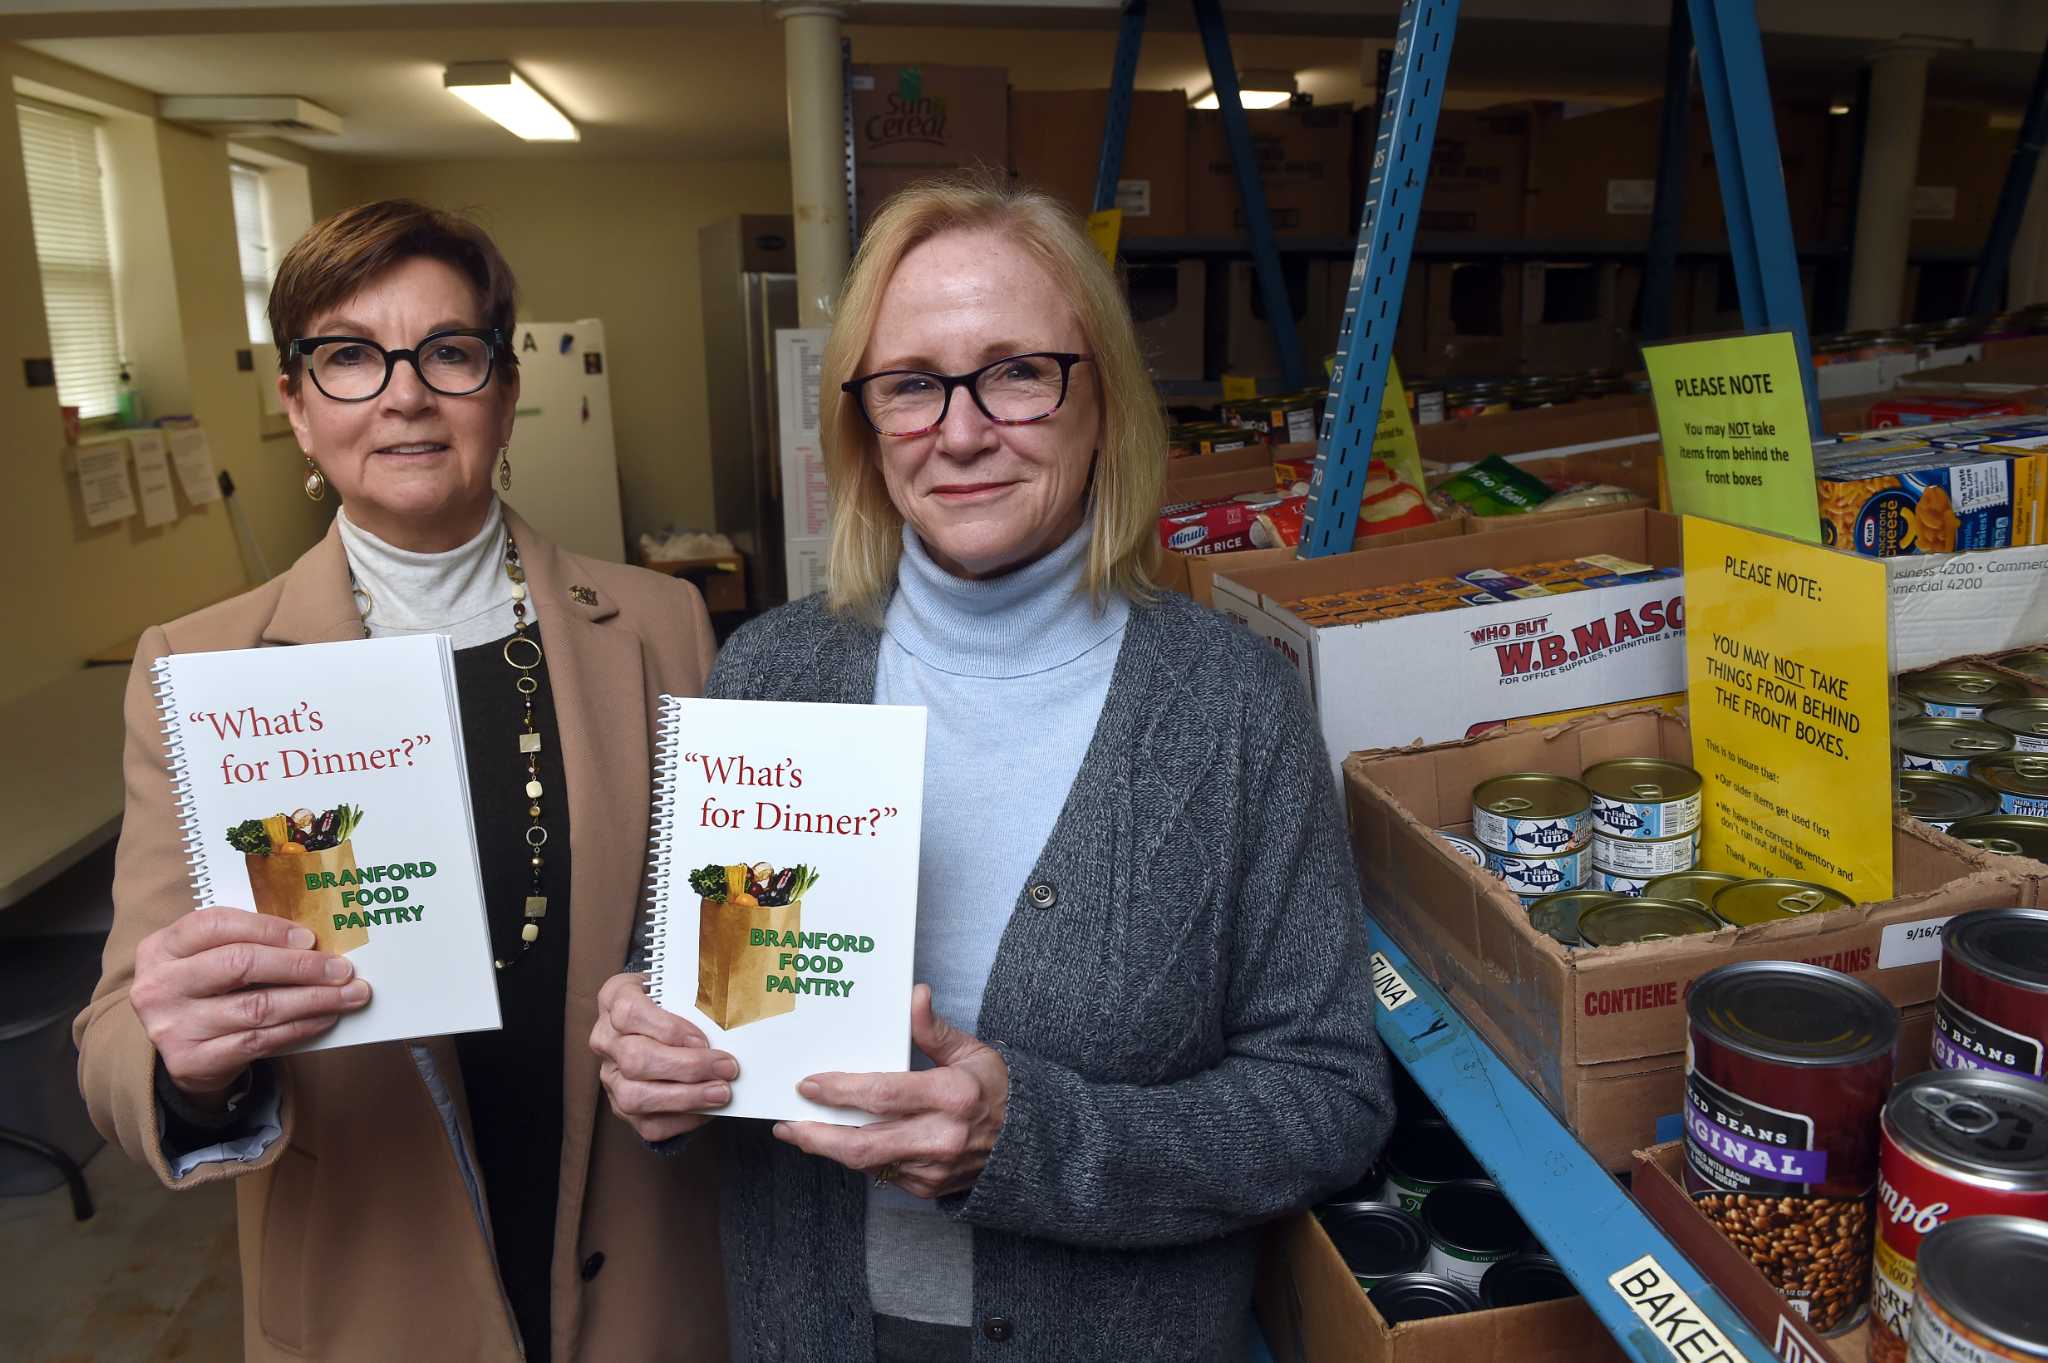 New Branford Food Pantry cookbook free for clients